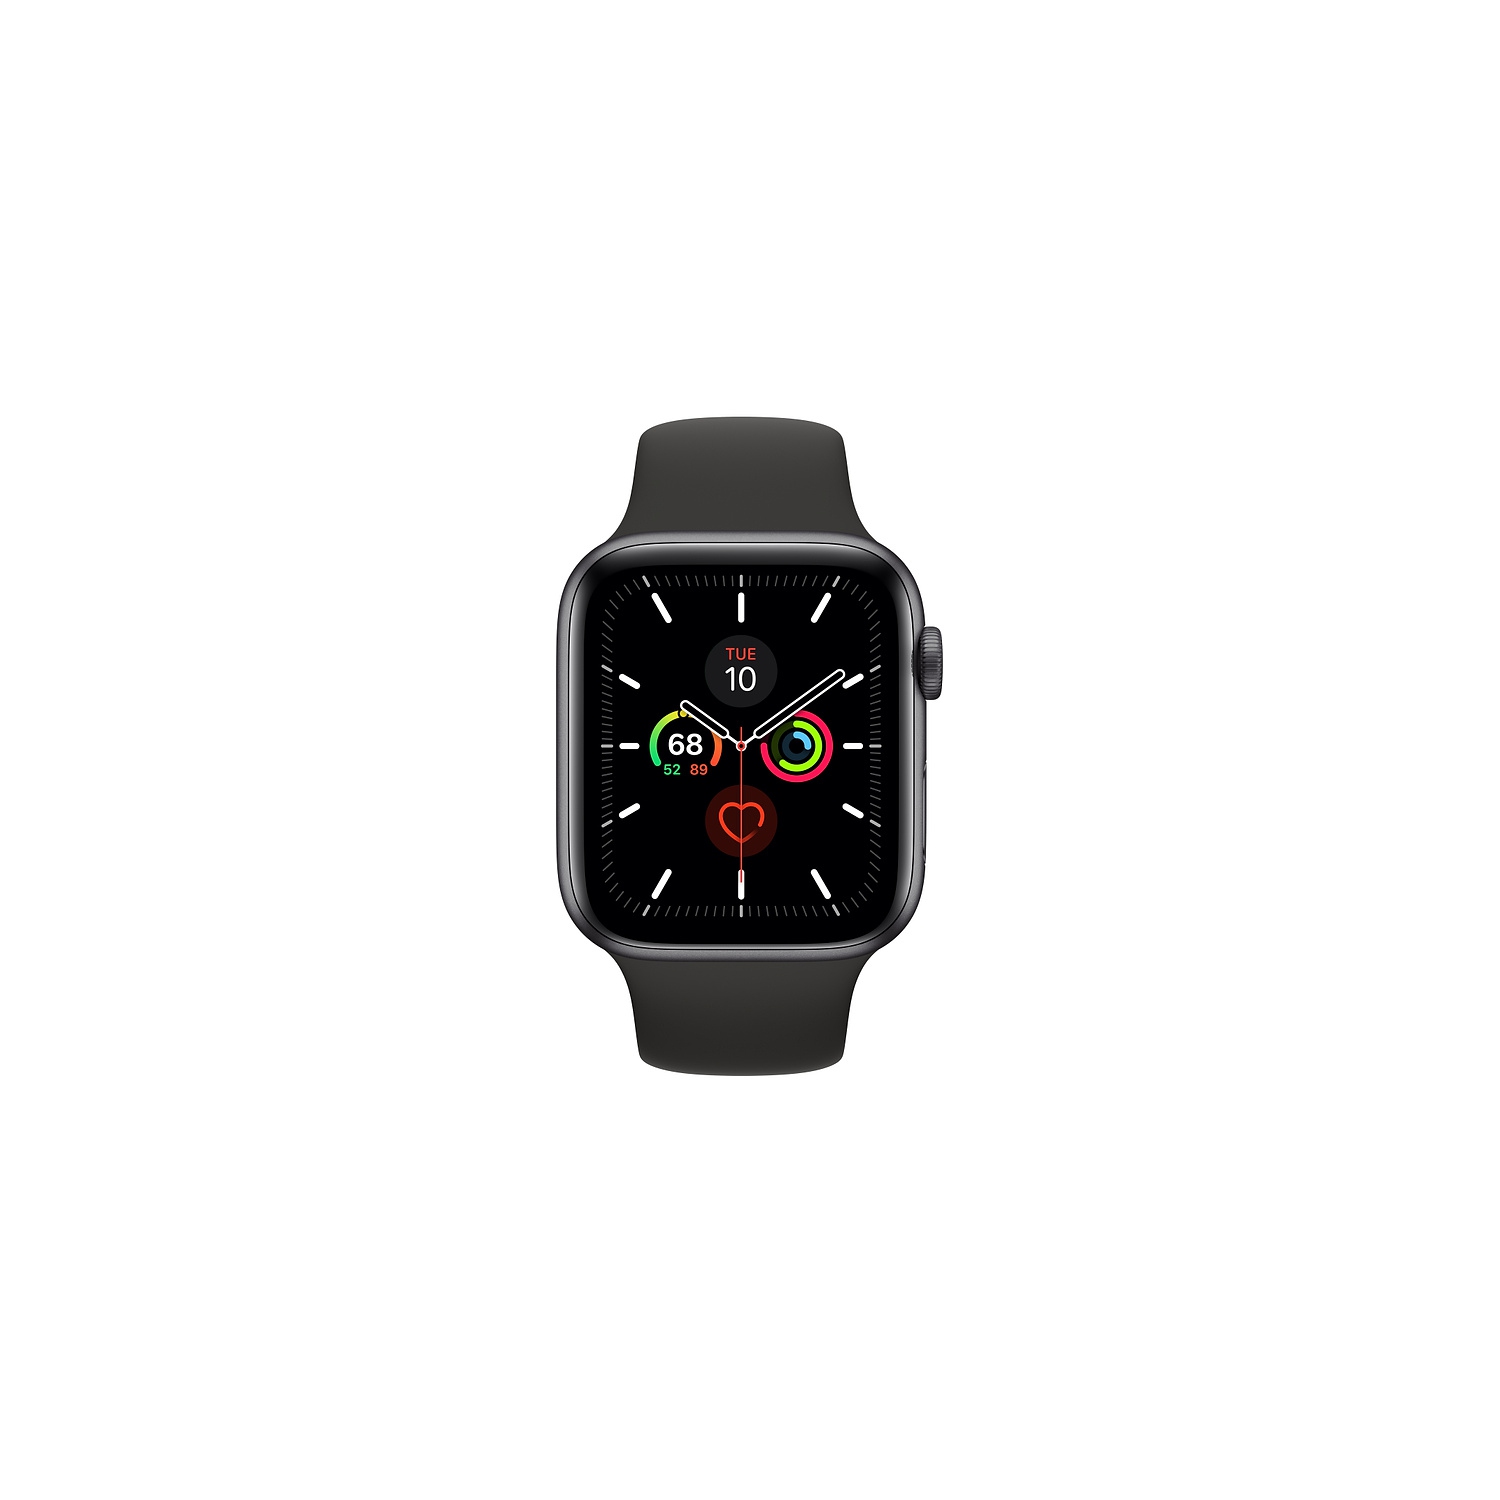 Refurbished (Excellent) - Apple Watch Series 5 (GPS + Cellular) 44mm Space Grey Aluminum with Black Sport Band - Certified Refurbished